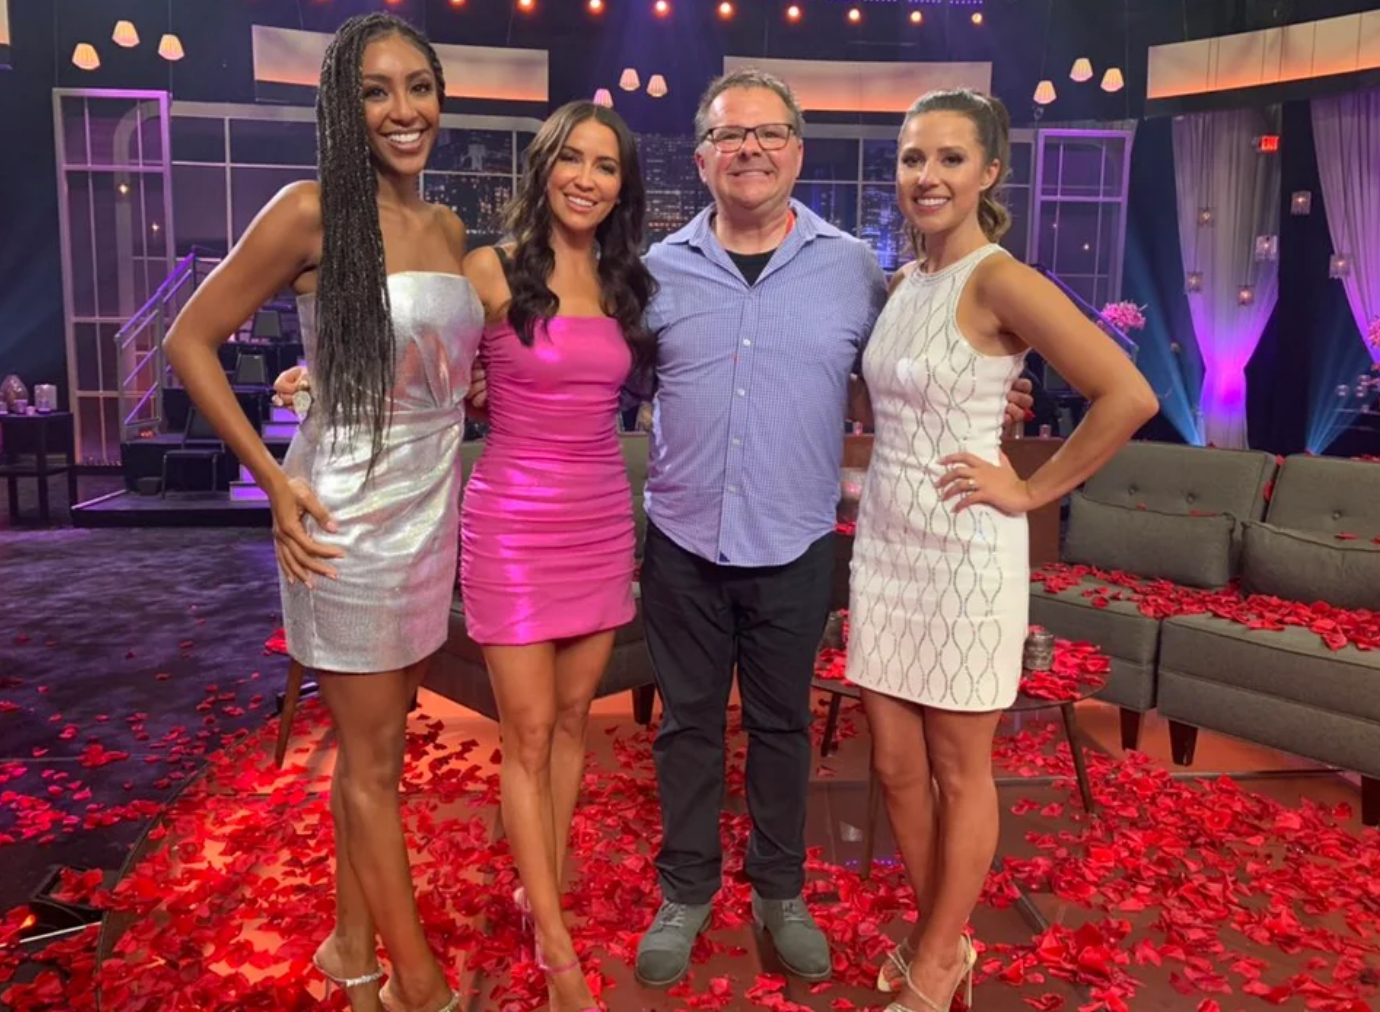 Comedian Gary Cannon on set of the "After the Finale Rose" special with Tayshia Adams, Kaitlyn Bristowe, and Katie Thurston.